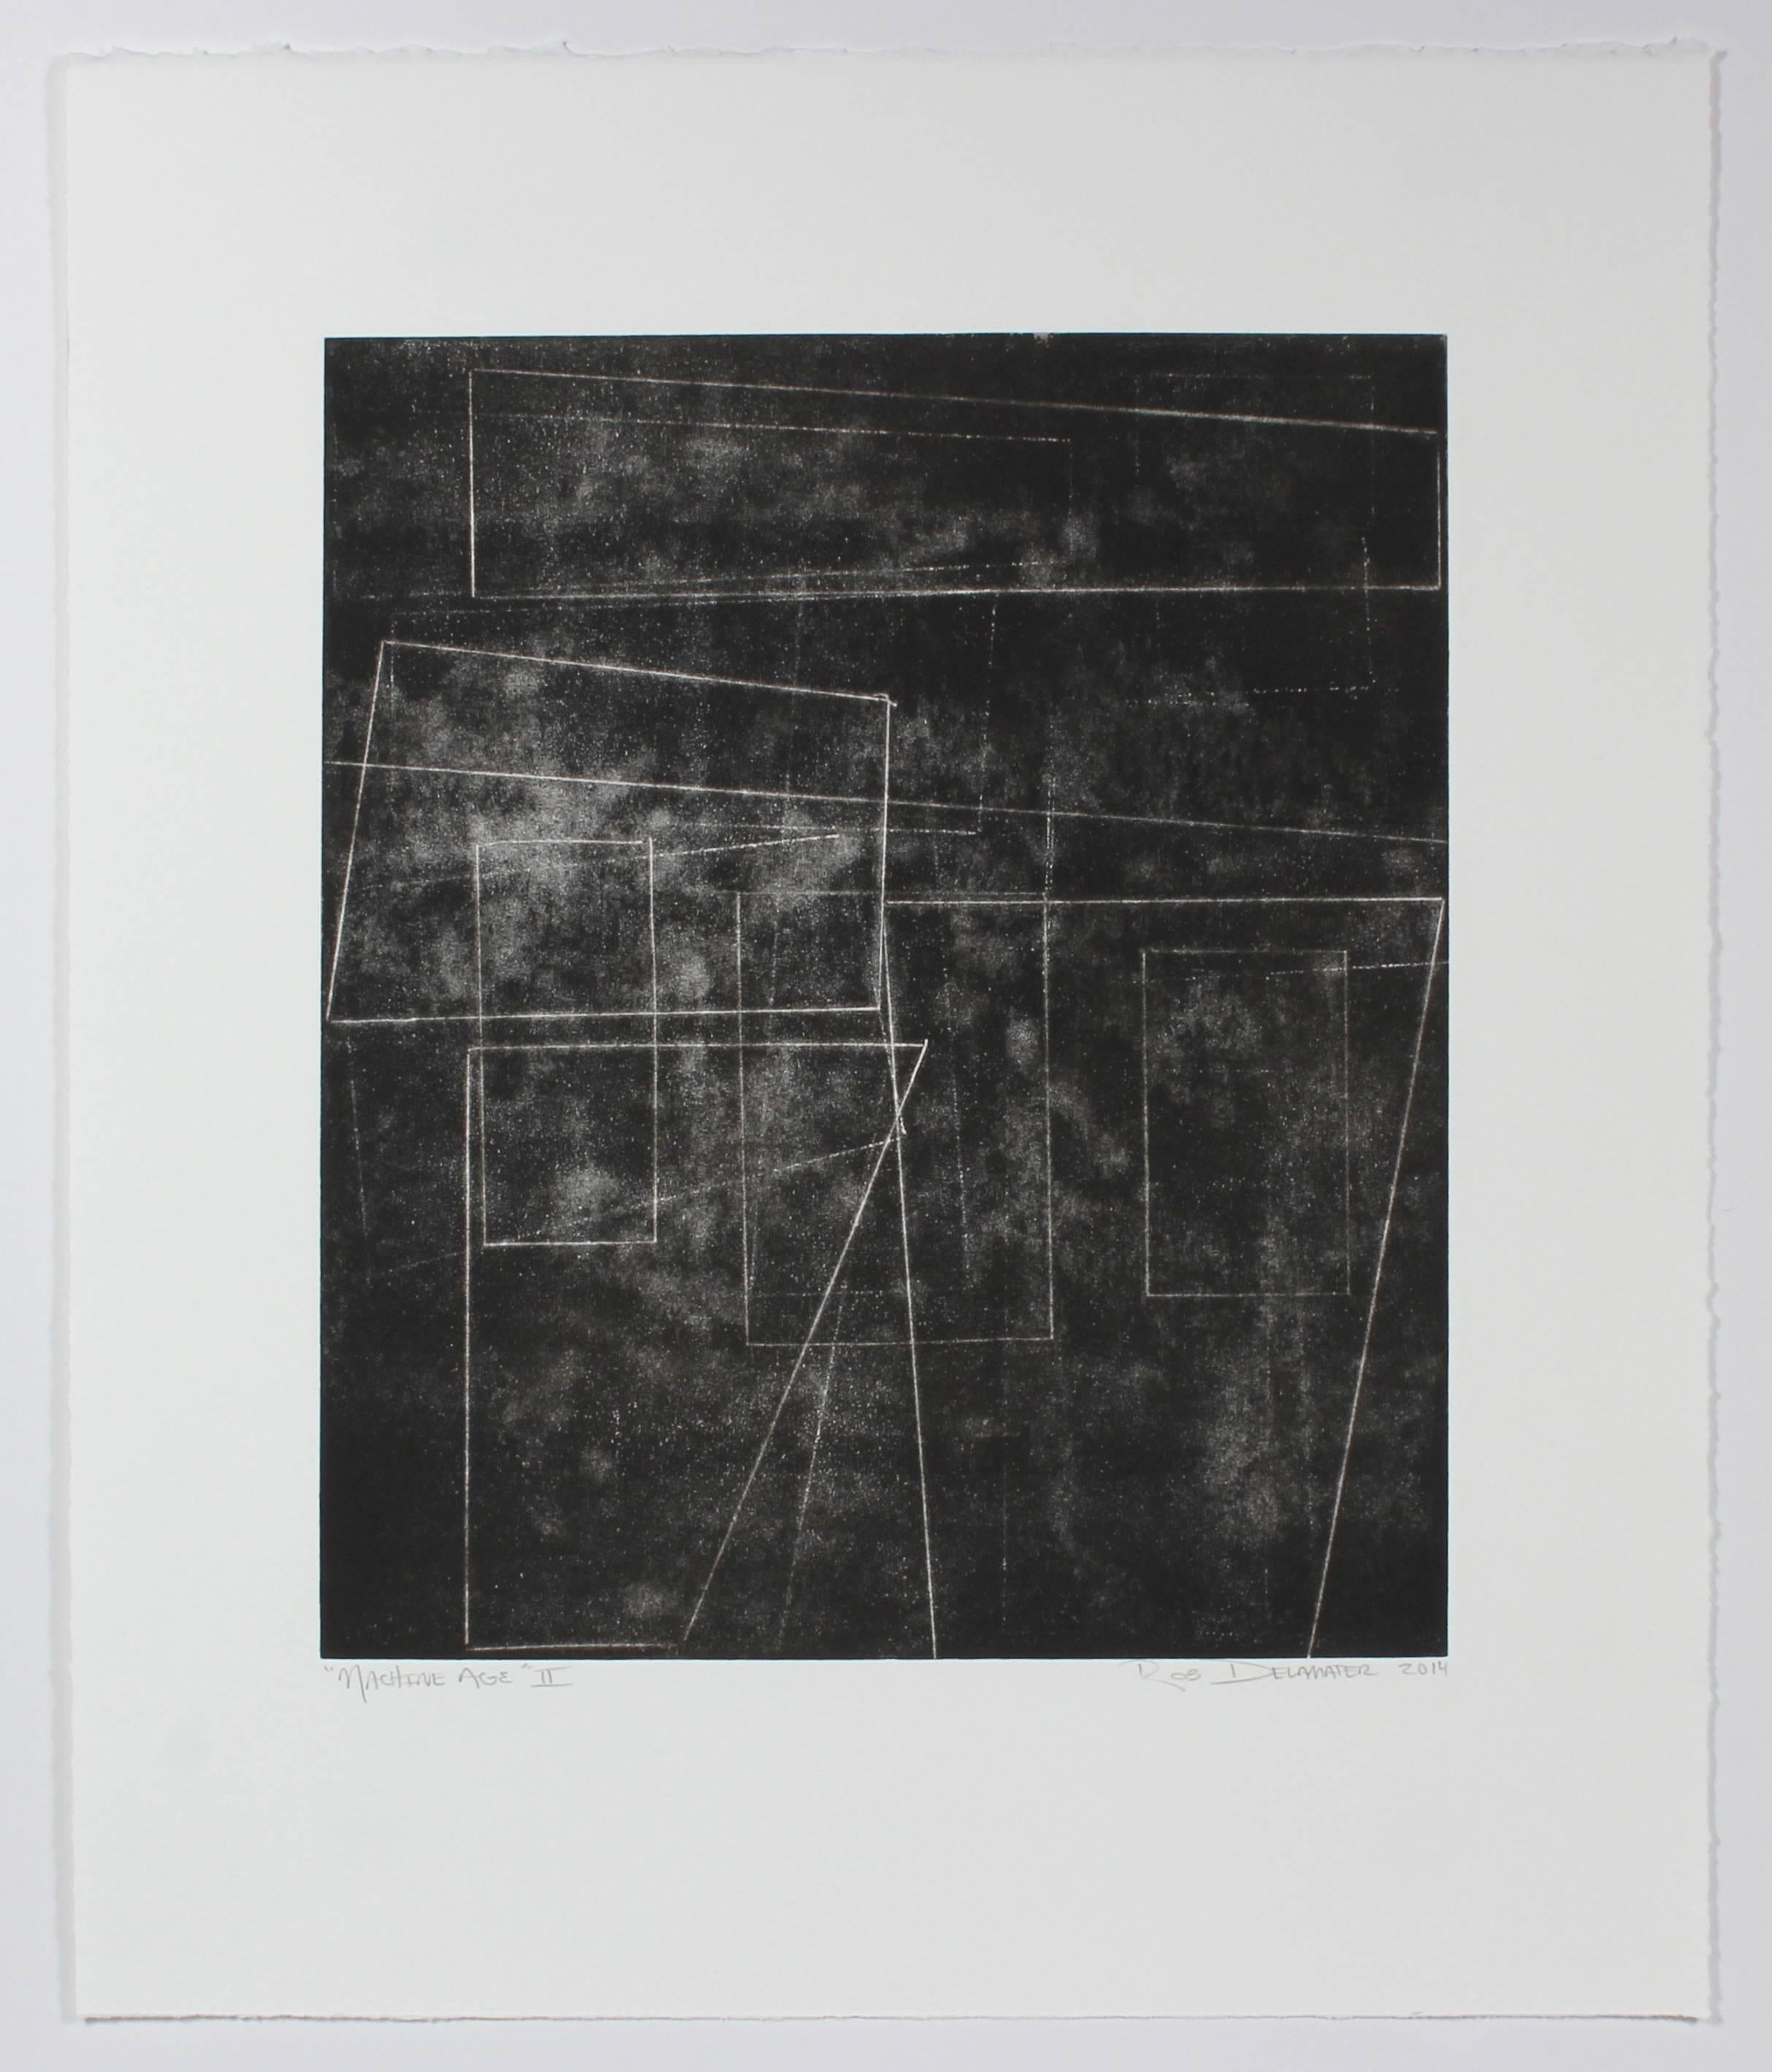 This 2014 monotype on paper abstract in black and white entitled 